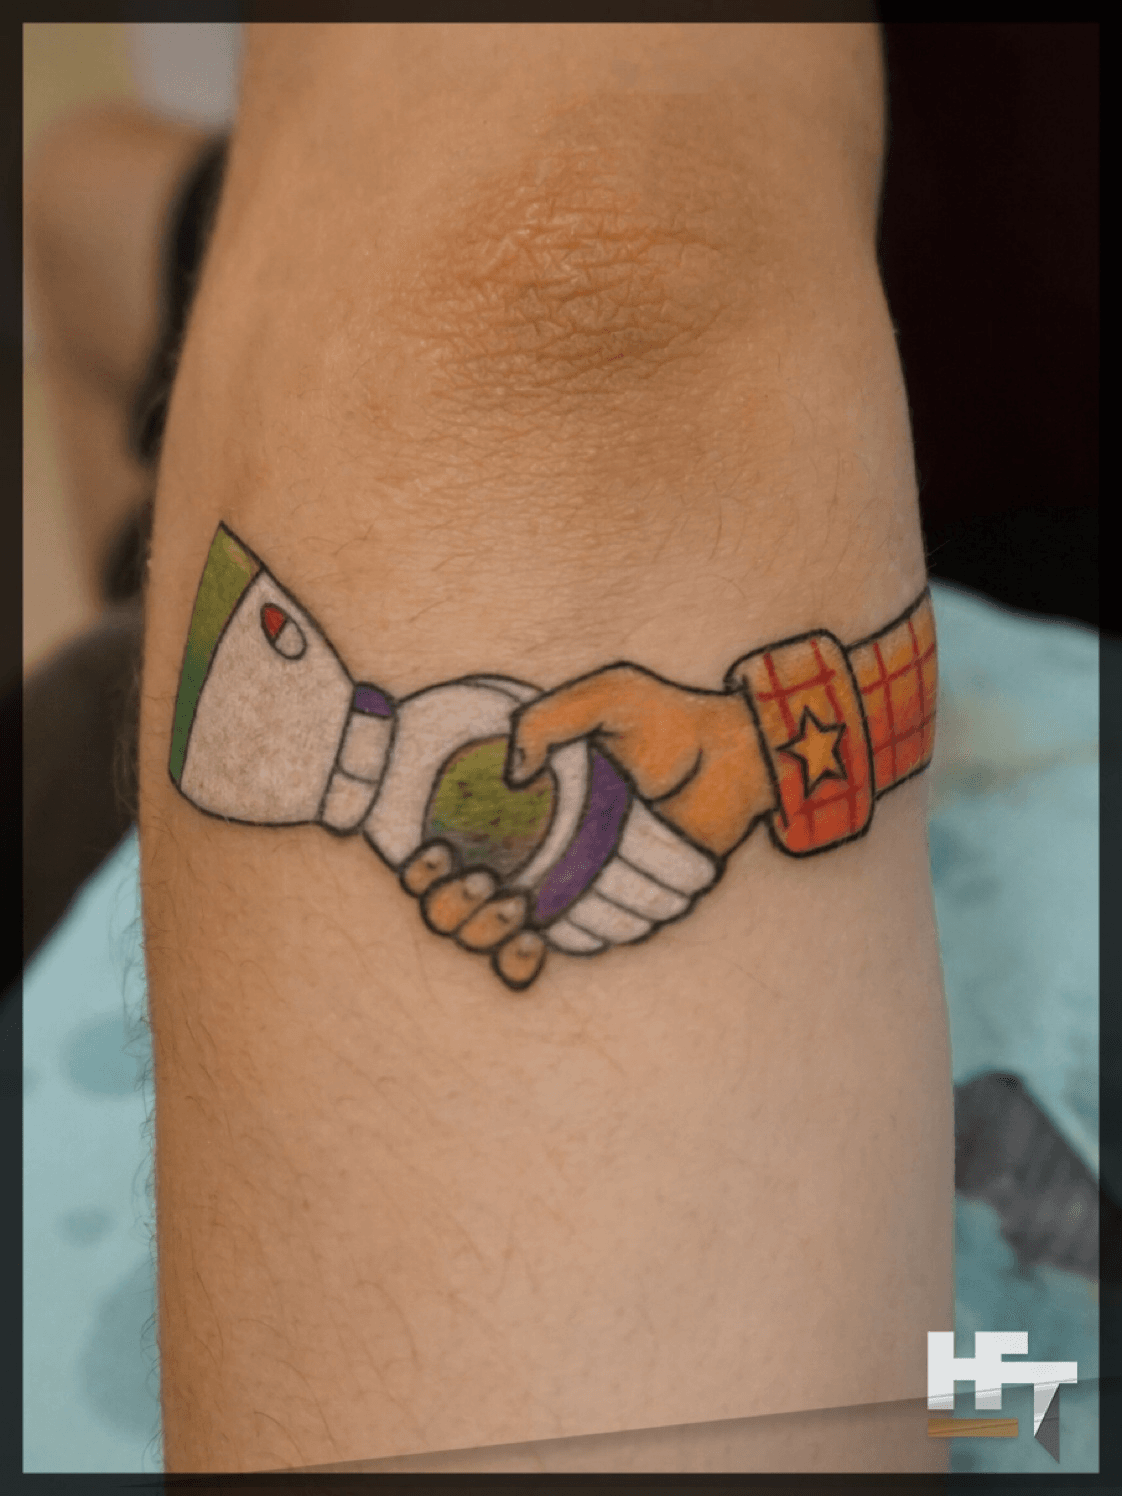 Mary Jane Tattoo Artist  Rex and Woody from Toy Story Make up your own  mind whats happening Thank you Rosemary for such a cool idea and trusting  me again Im down